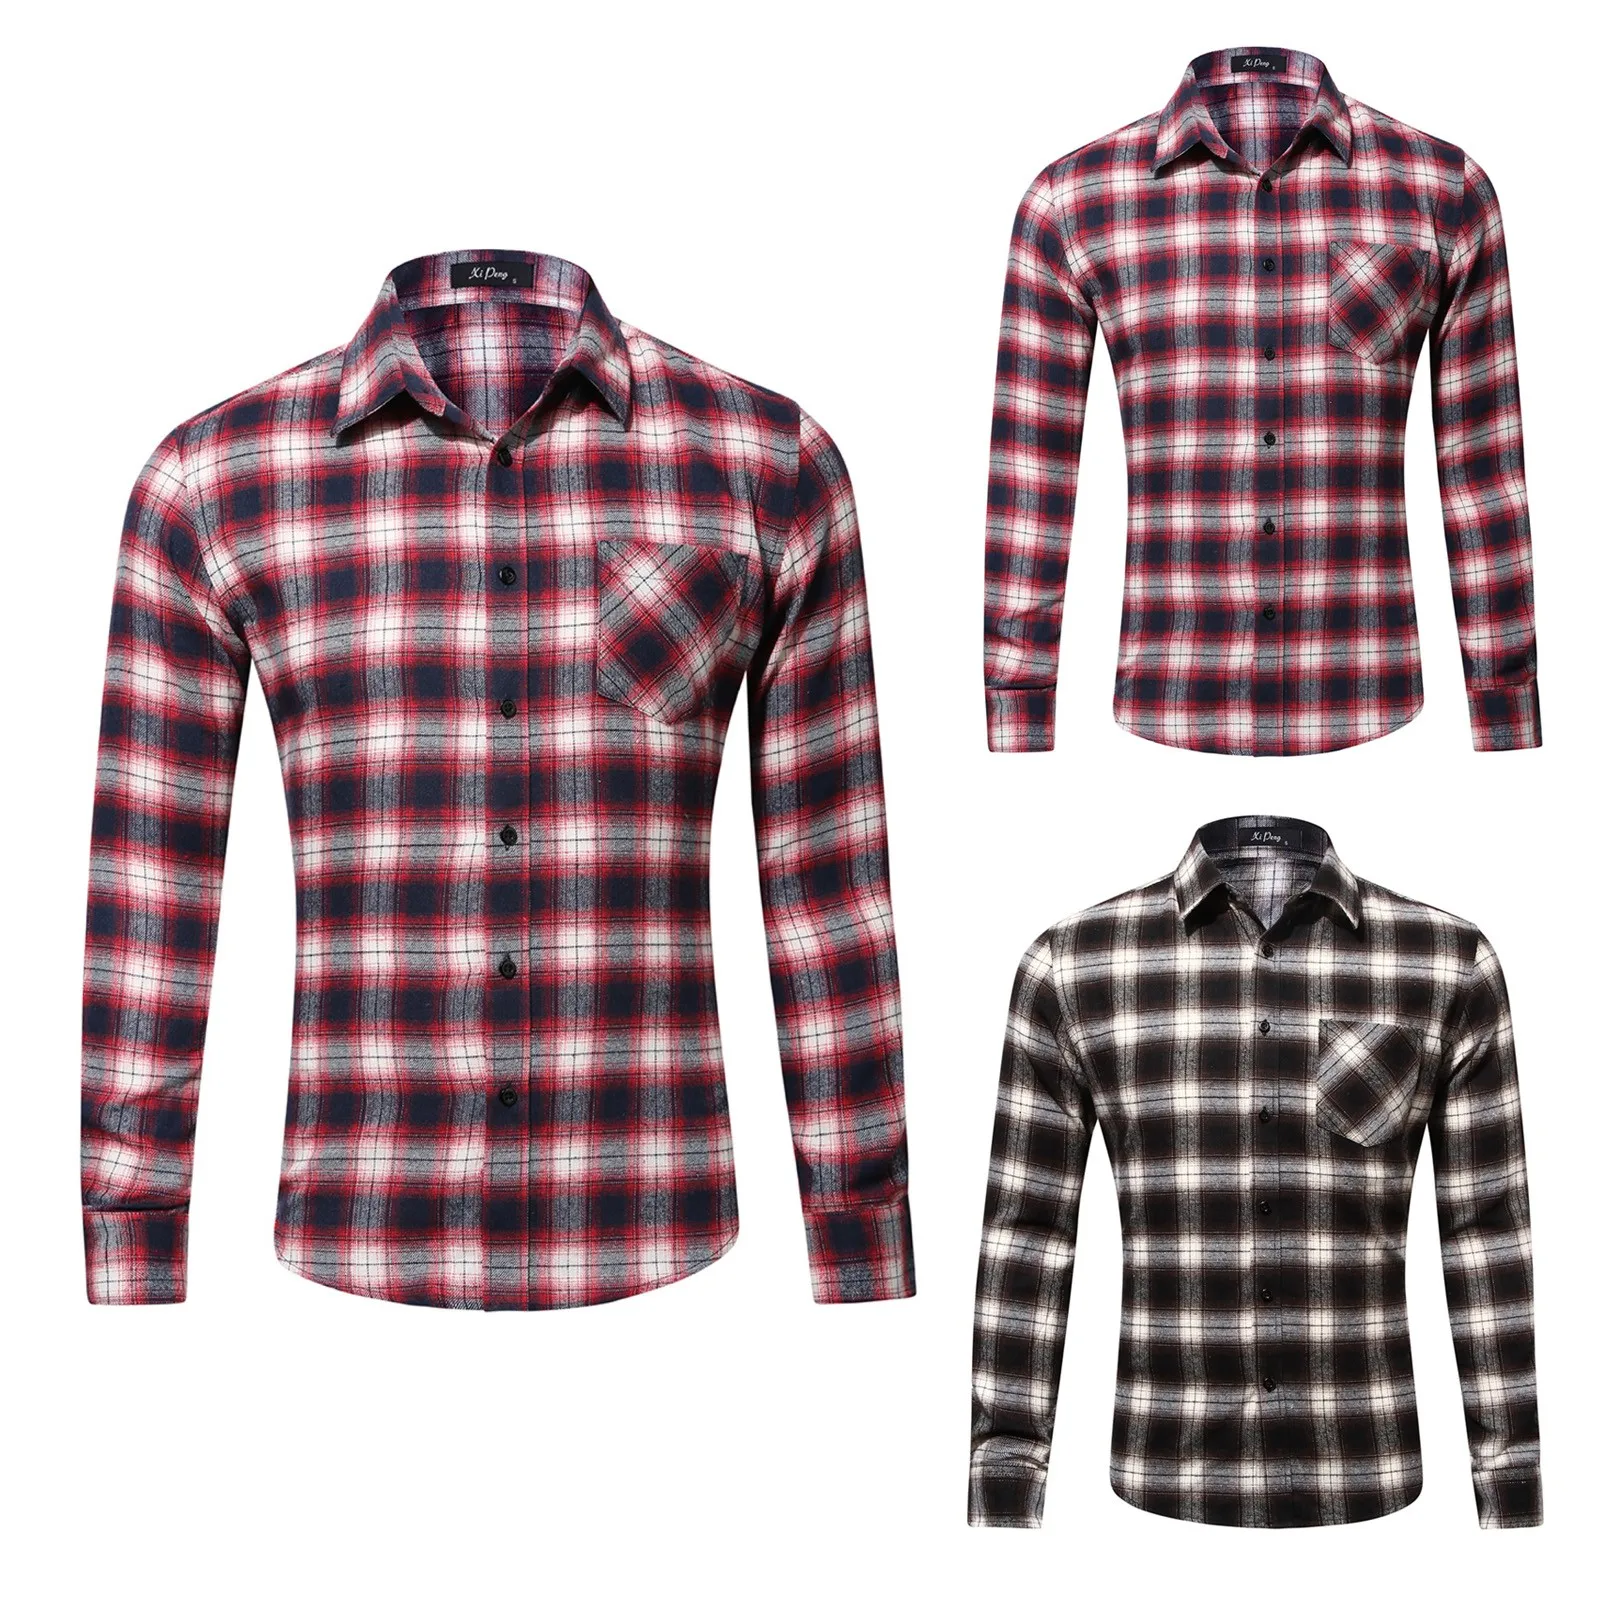 

Plaid Shirt 2021 New Autumn Winter Flannel Red Checkered Shirt Men Shirts Long Sleeve Chemise Homme Cotton Male Check Shirts